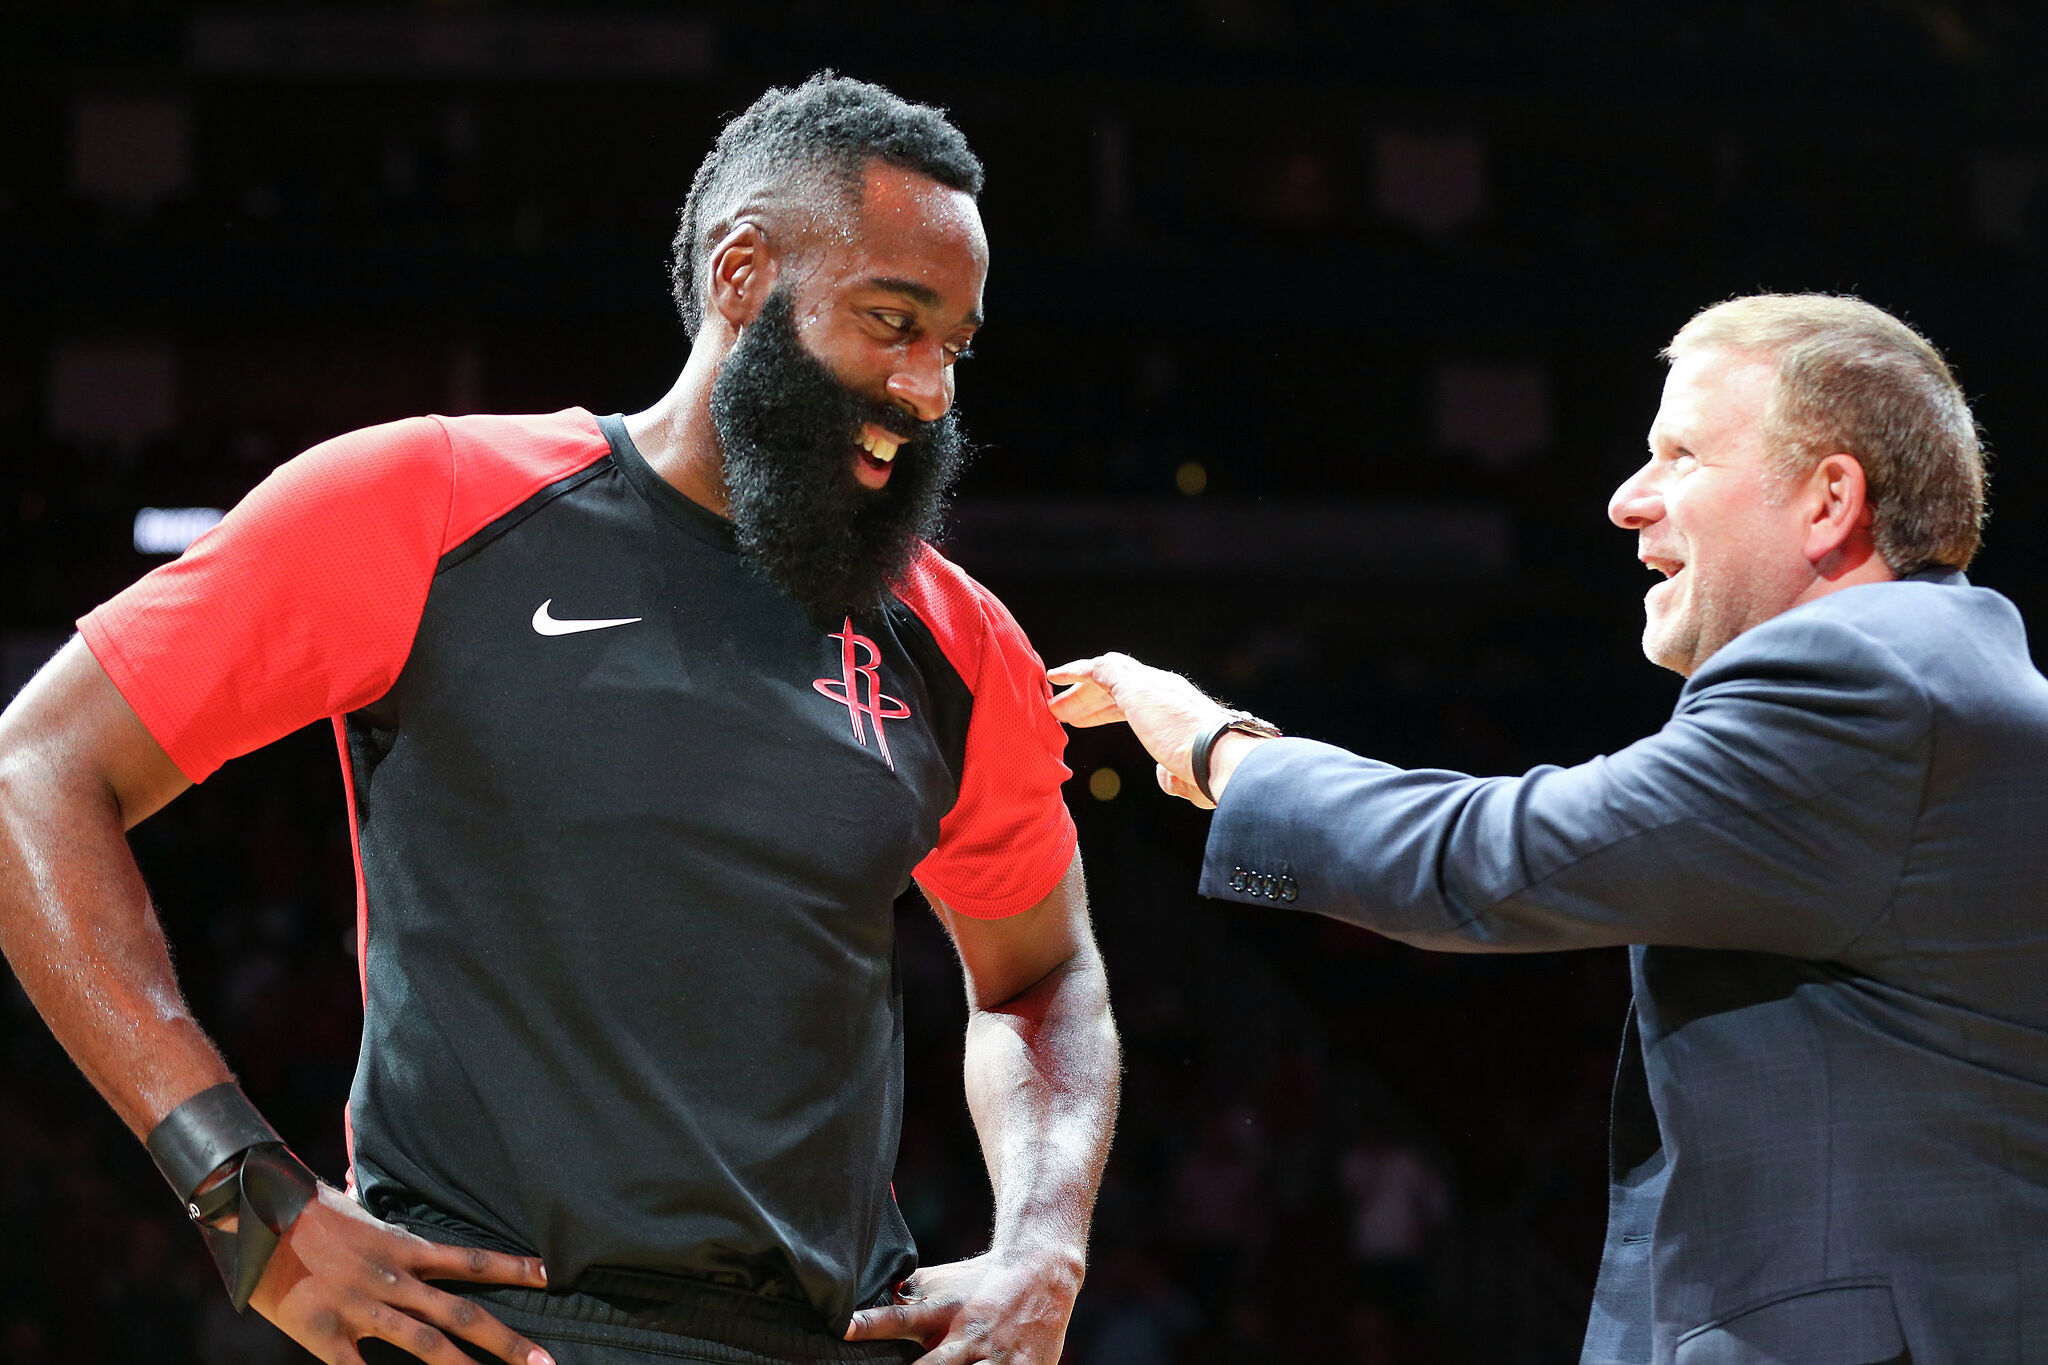 James Harden catchup guide: What to know about the new Sixers star